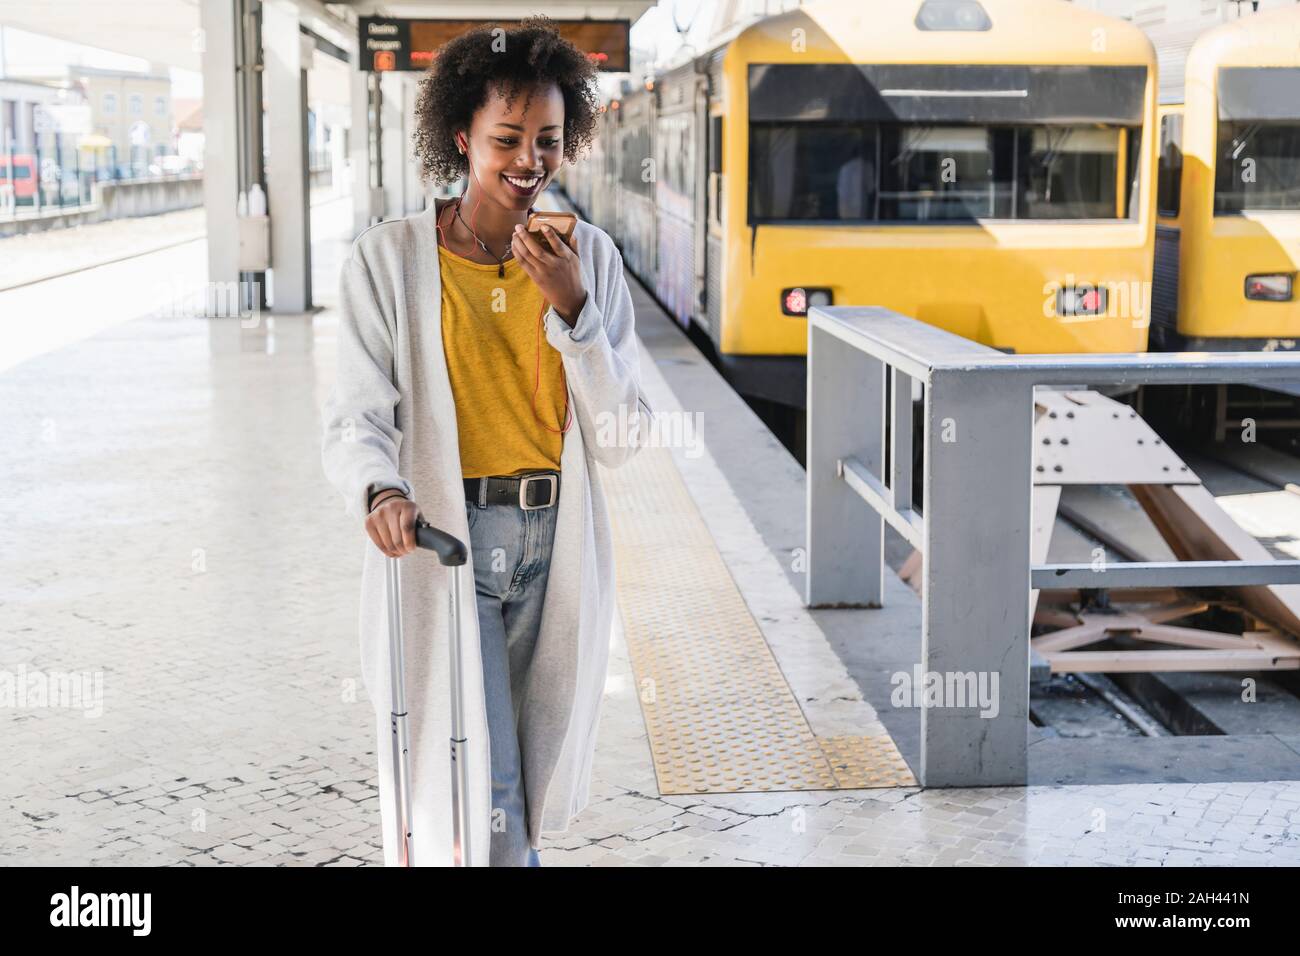 Smiling young woman with earphones using smartphone at station platform Stock Photo